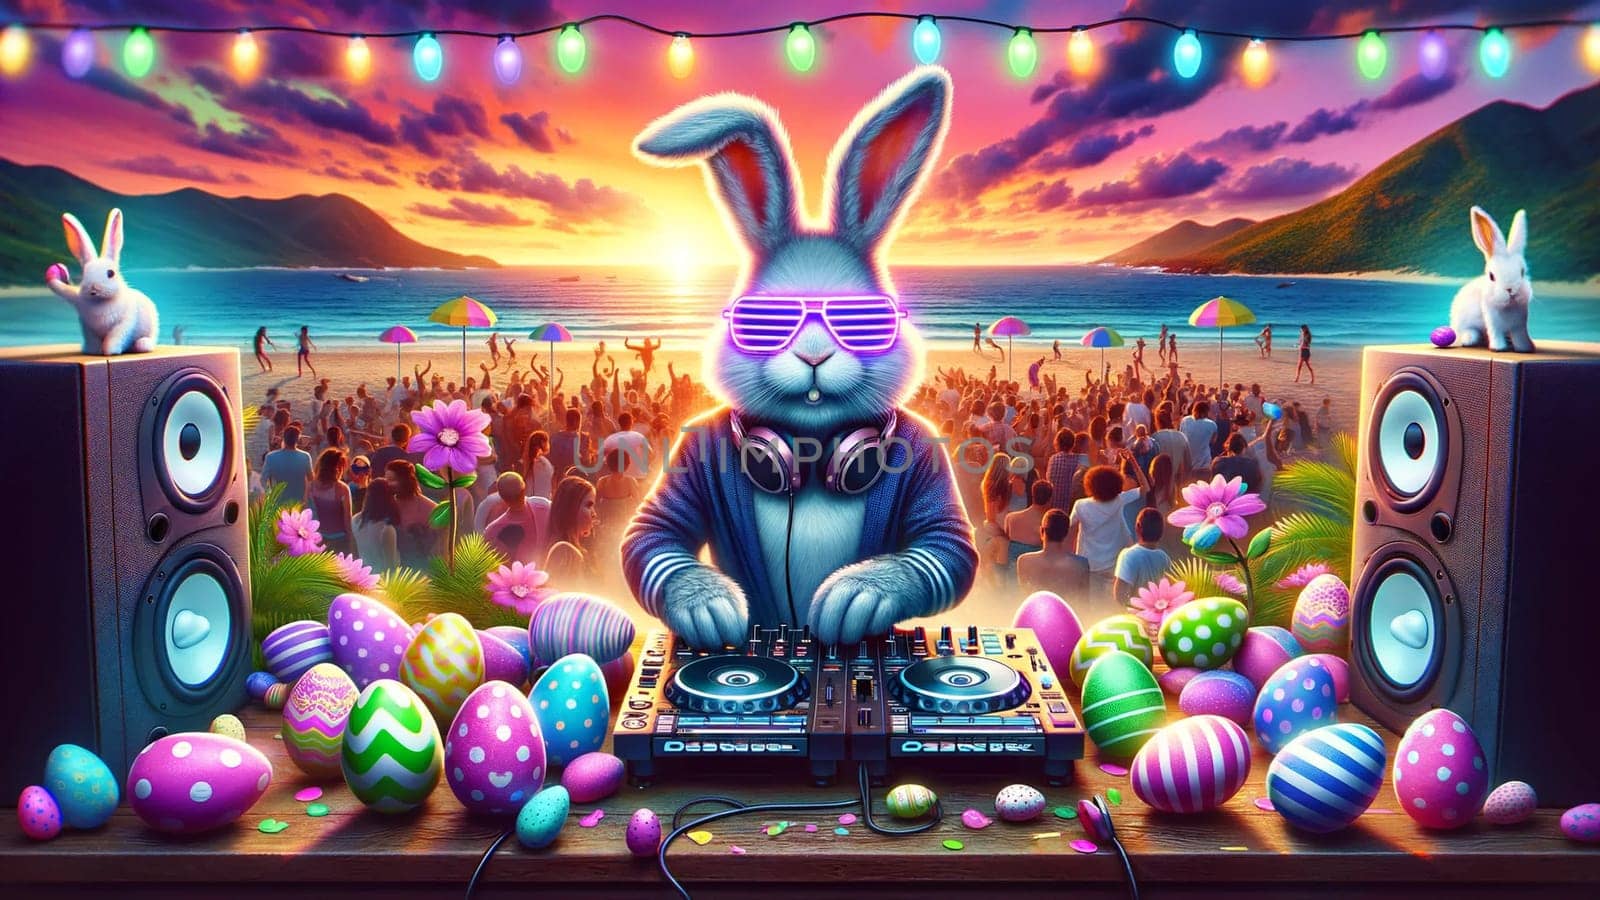 A DJ Easter Bunny with neon sunglasses spins records at a beach party with Easter eggs and decorations on the DJ booth, as the sun sets in the background. by Designlab